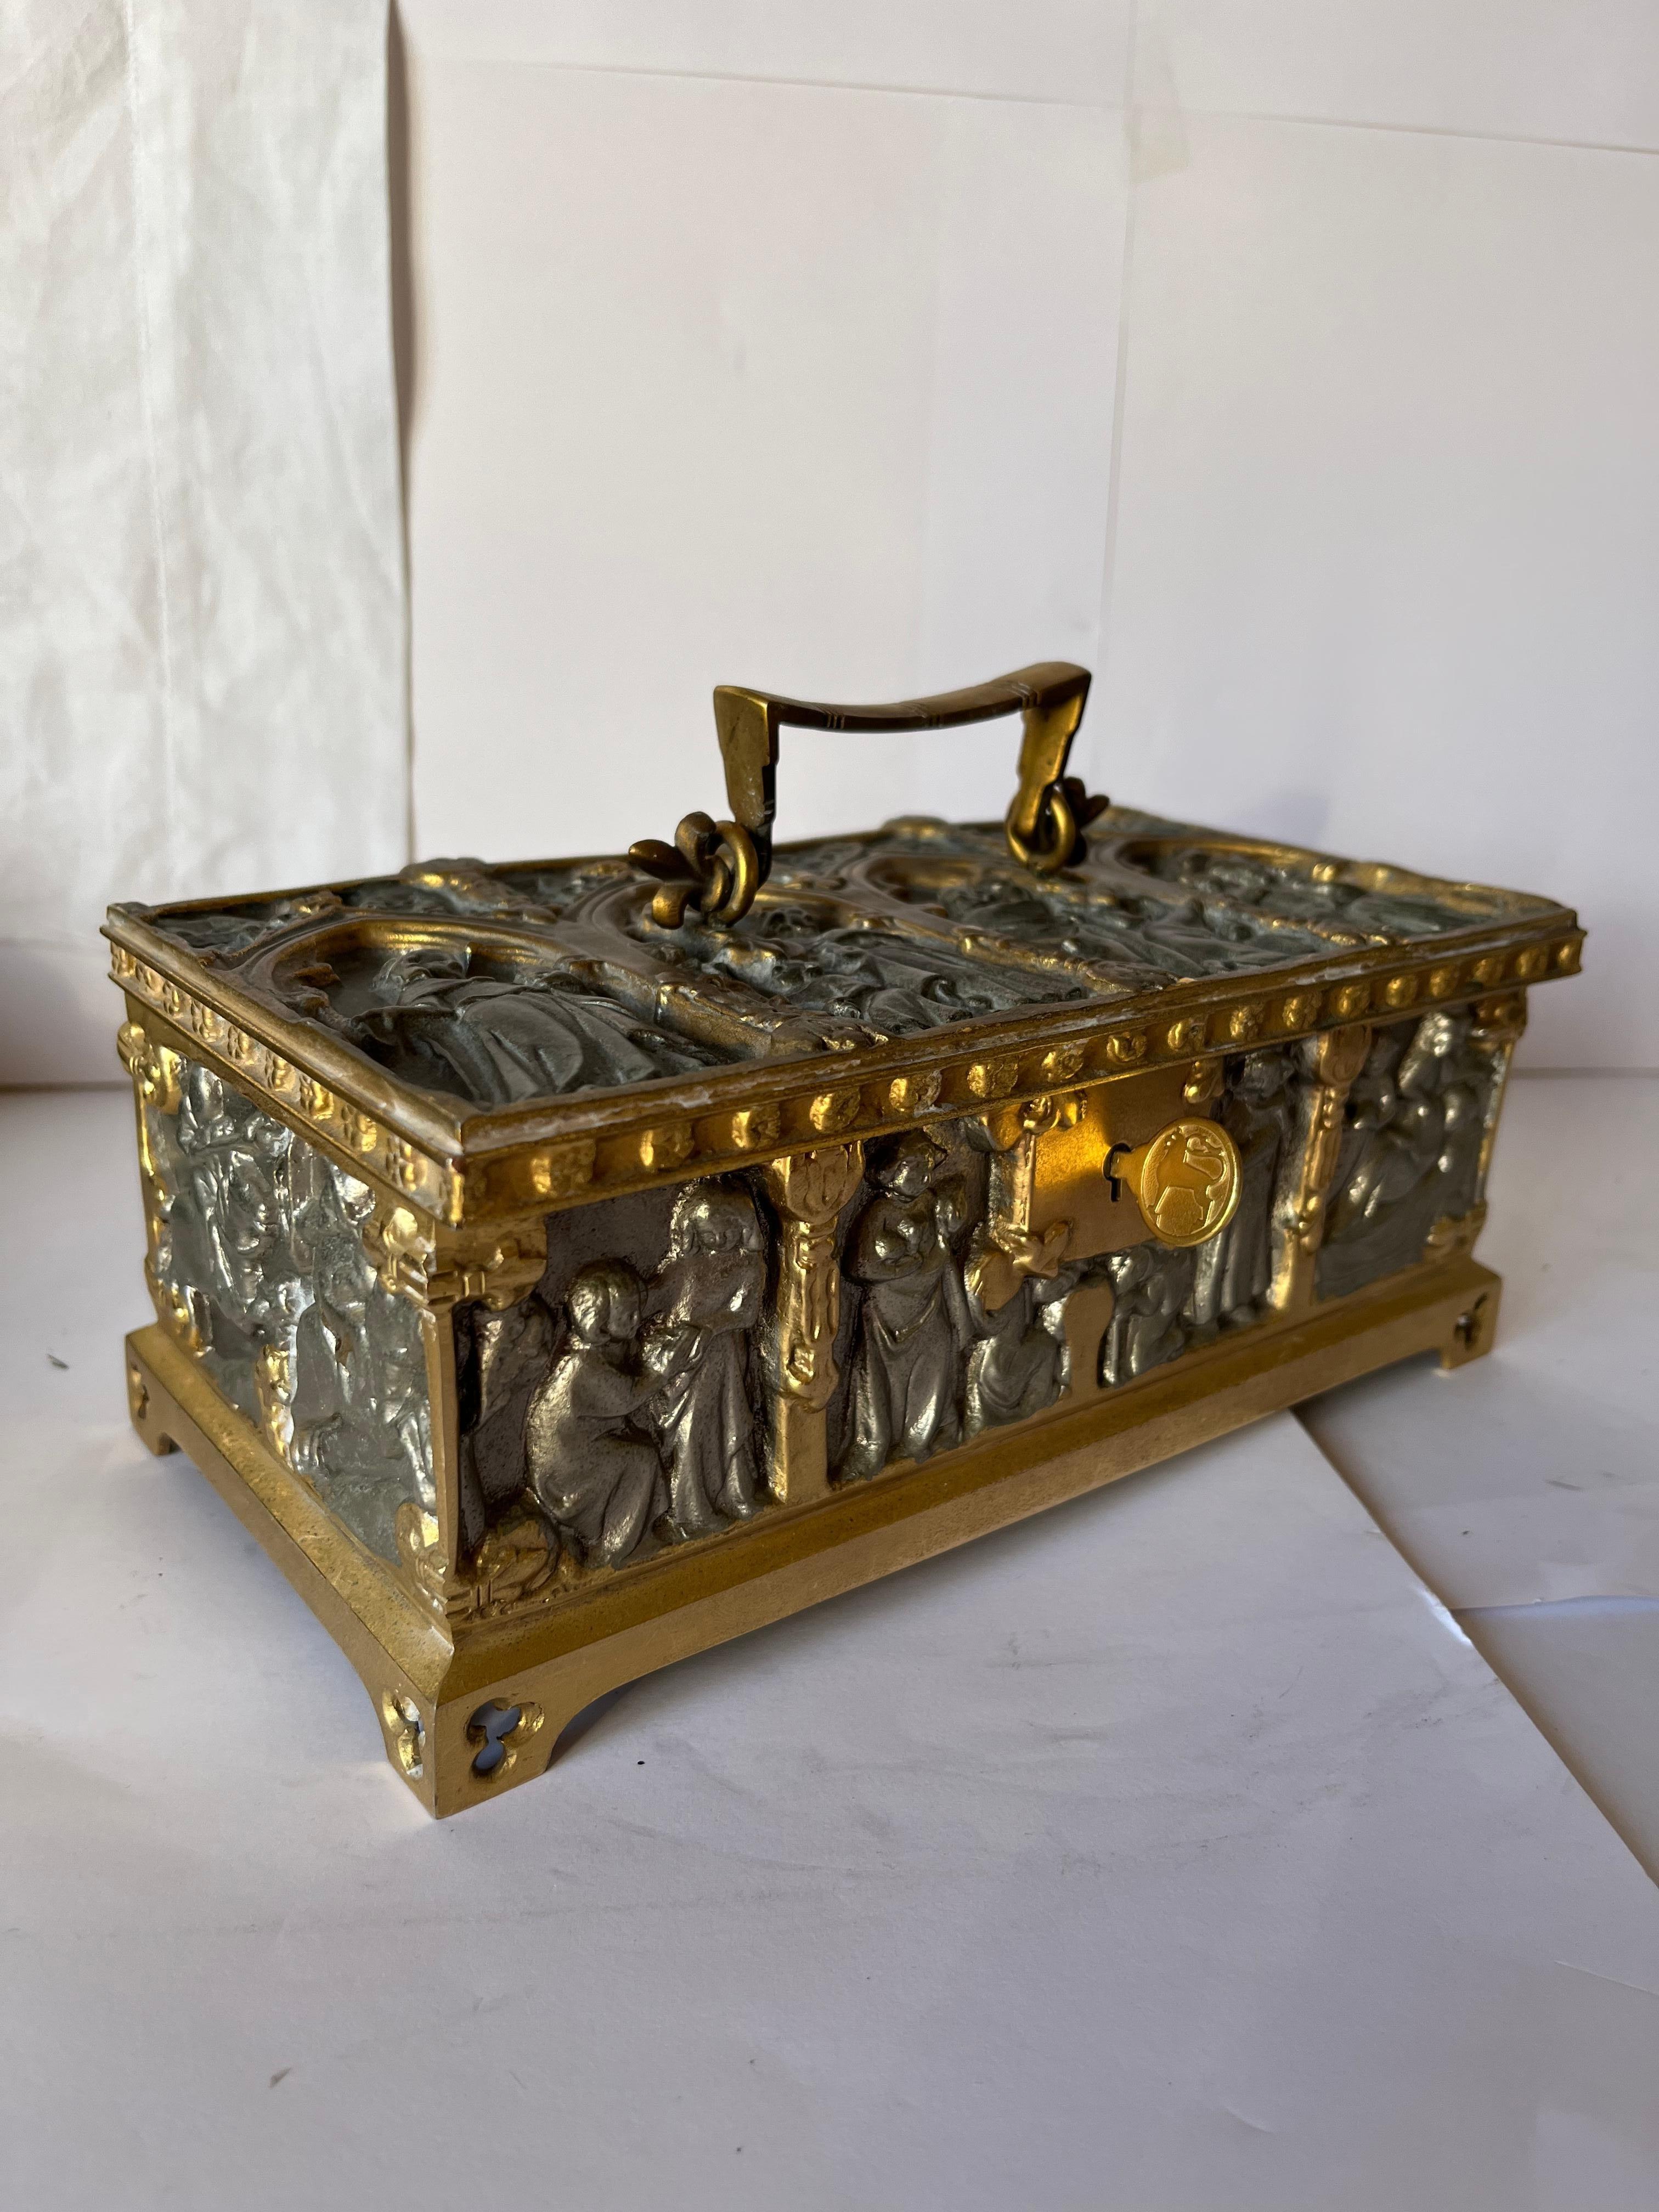 Middle age Gothic European Renaissance style for the jewelry box in steel with golden parts.
We recognize middle age figures all around and on the top of the box and the renaissance architectural design on the top and on each side of the small